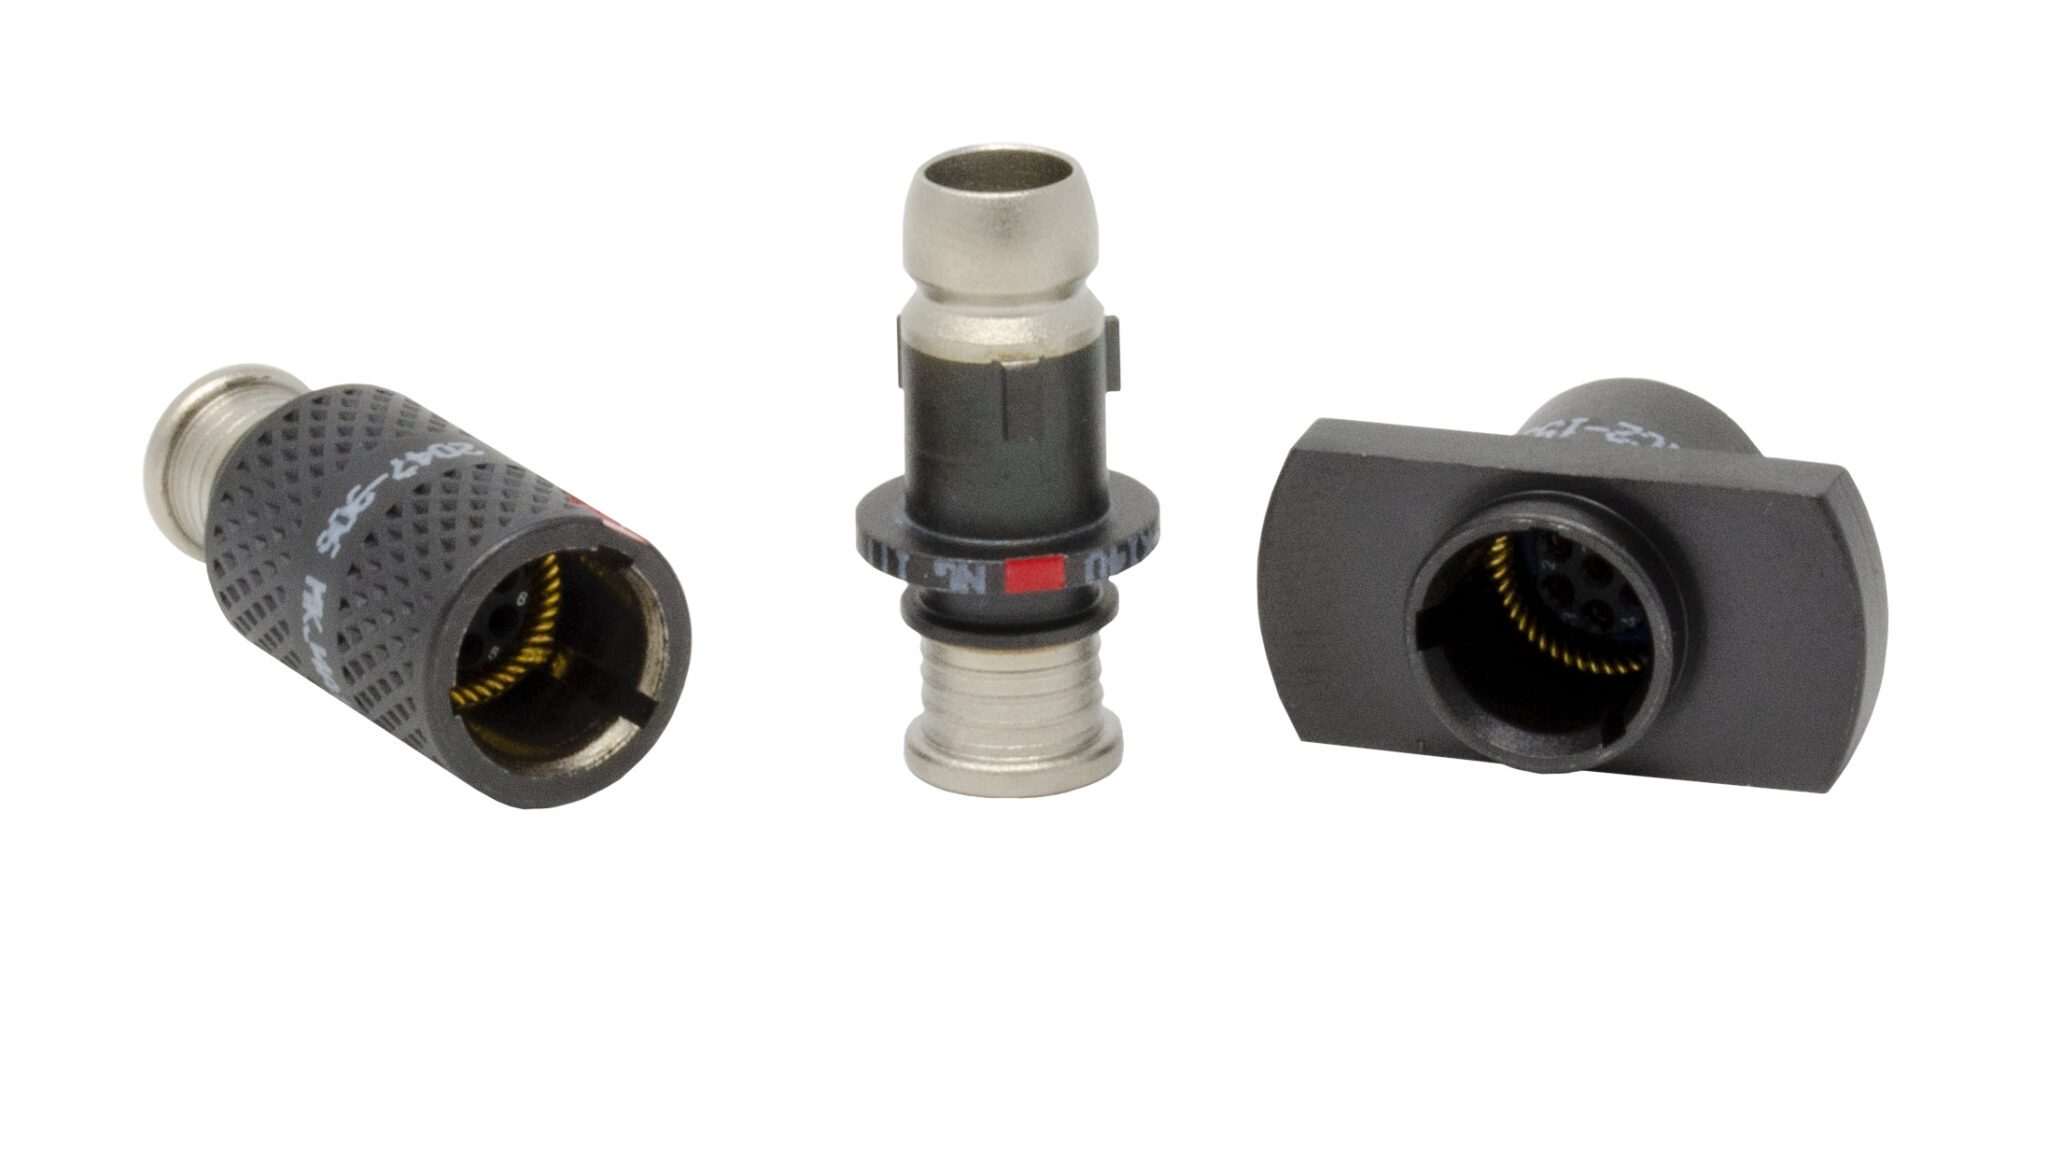 Part of the MKJ family of miniature circular connectors, ITT Cannon’s MKJ Warrior Series